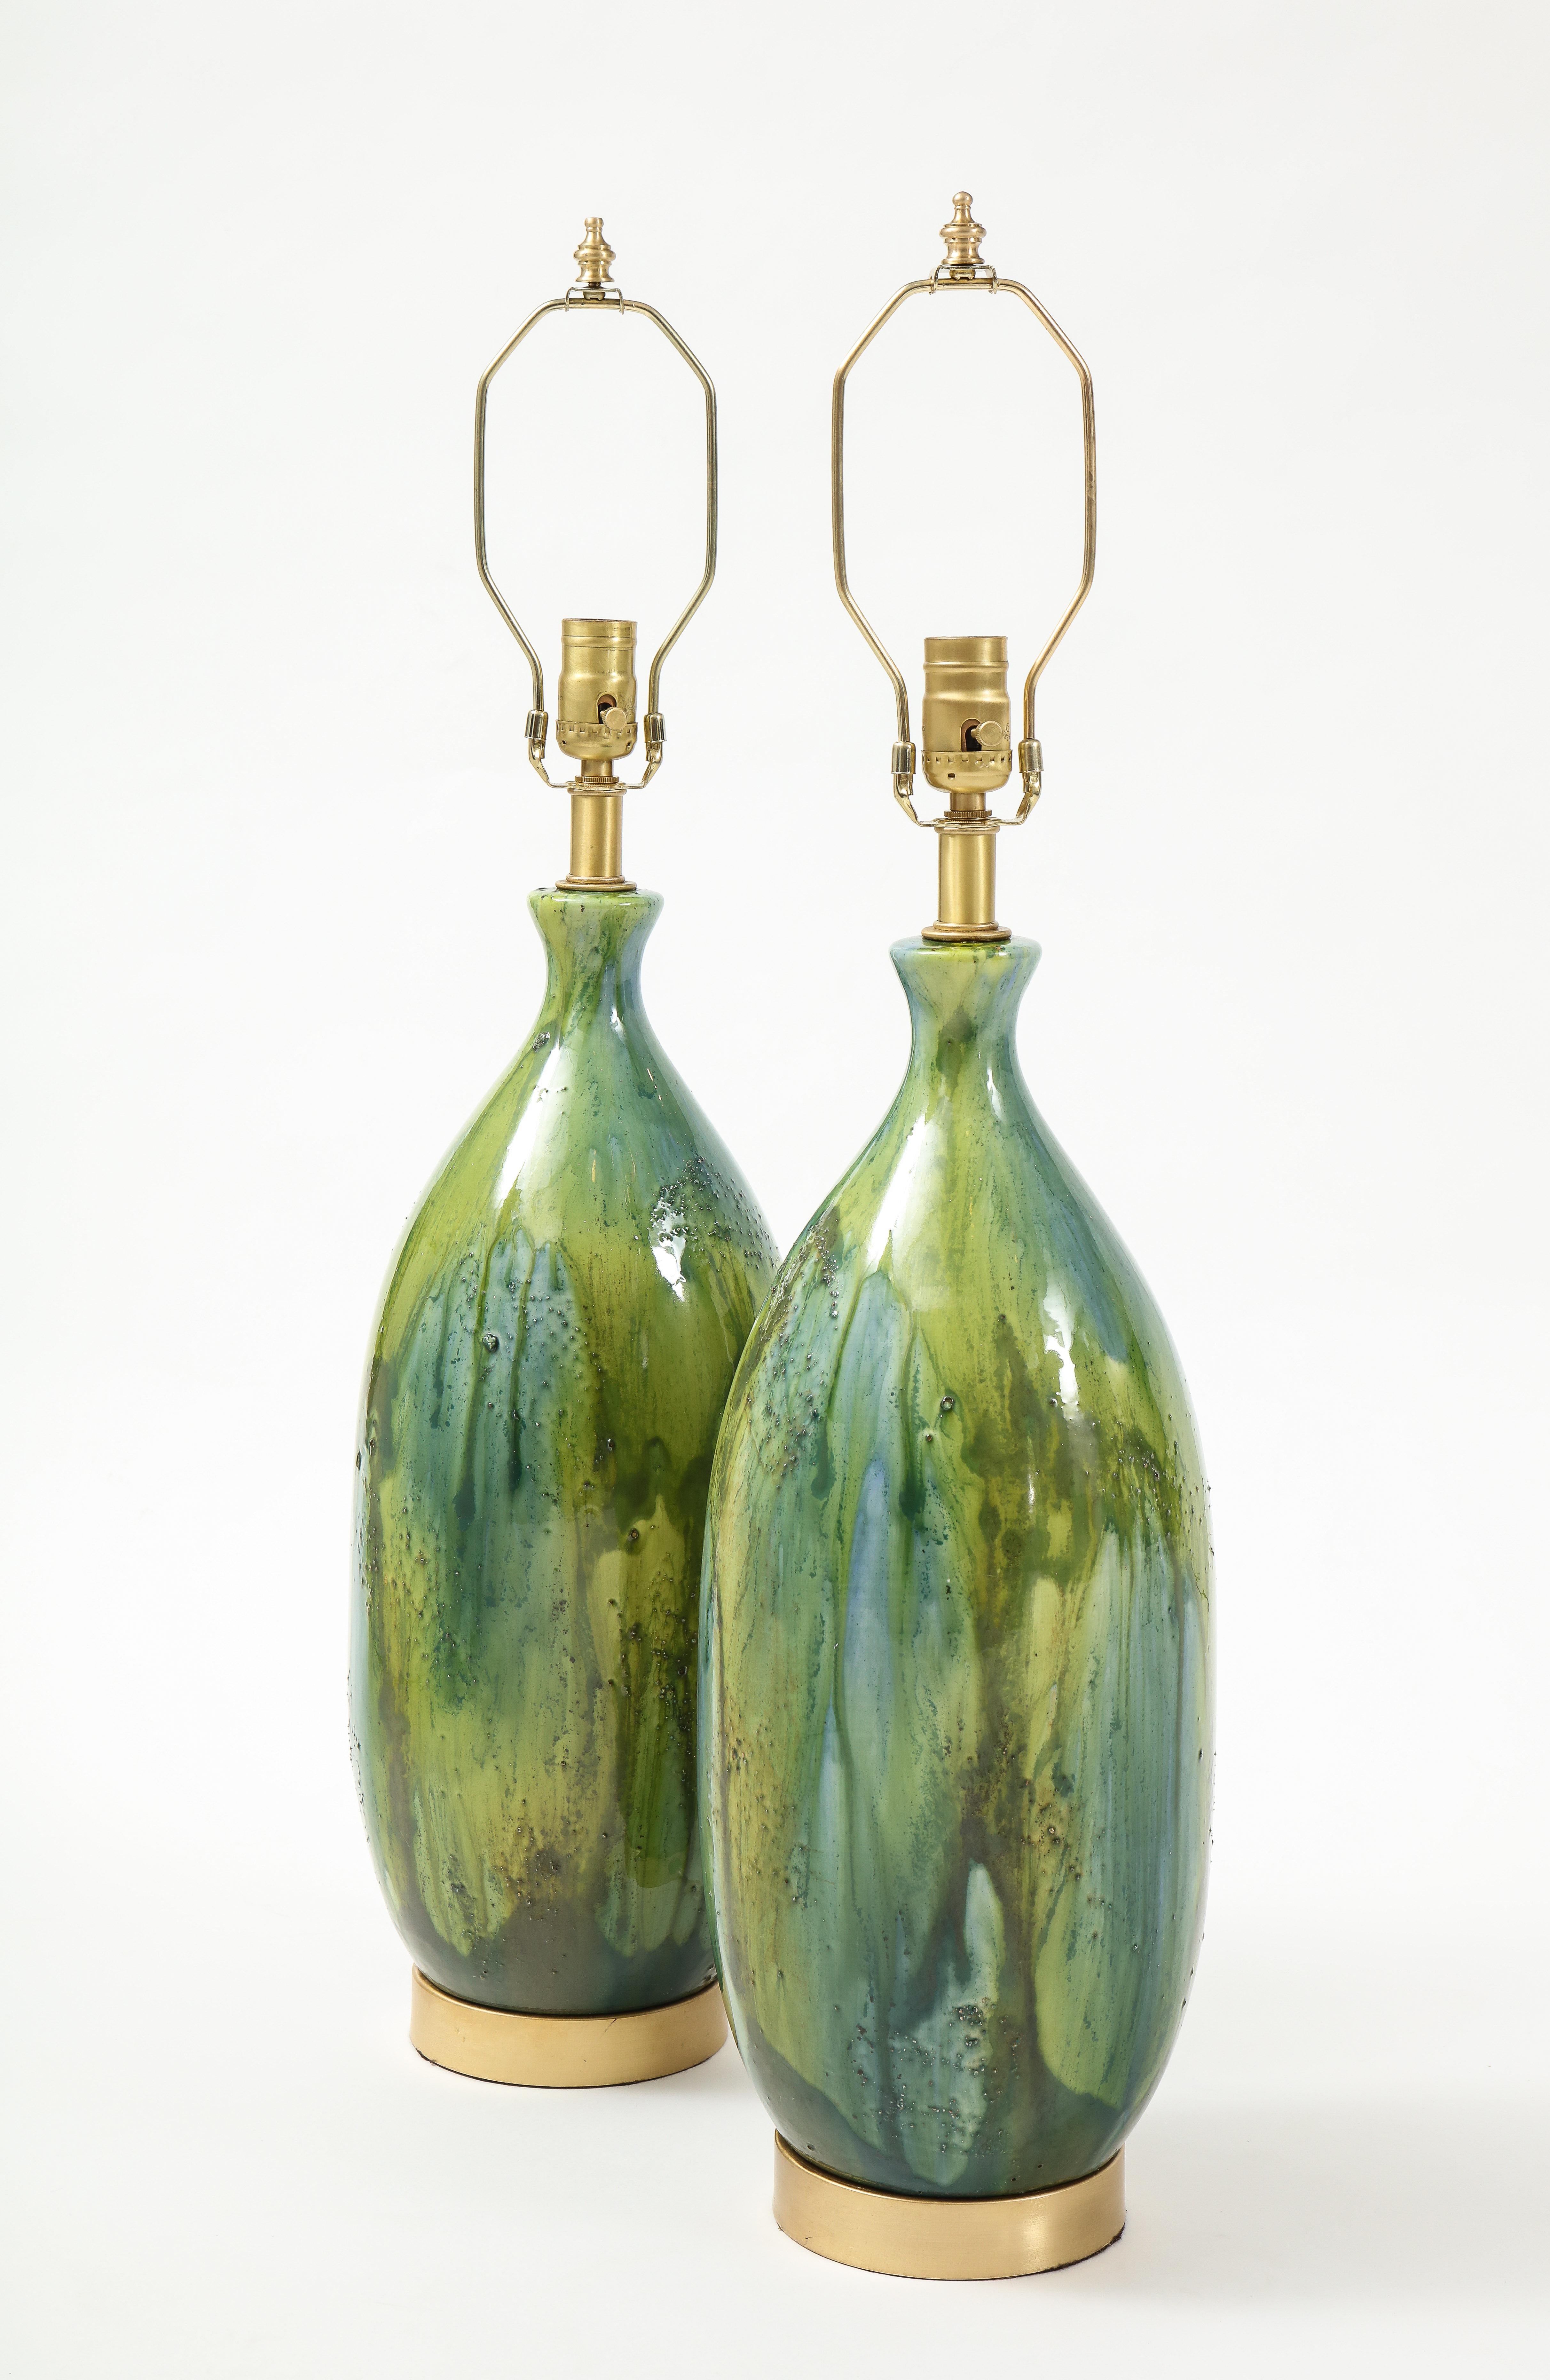 Pair of large scale bottle form ceramic lamps glazed in water and nature tones of blues and green sitting on satin brass disc bases. Rewired using clear cord, 100W max bulbs. Colors reminiscent of a Claude Monet painting.